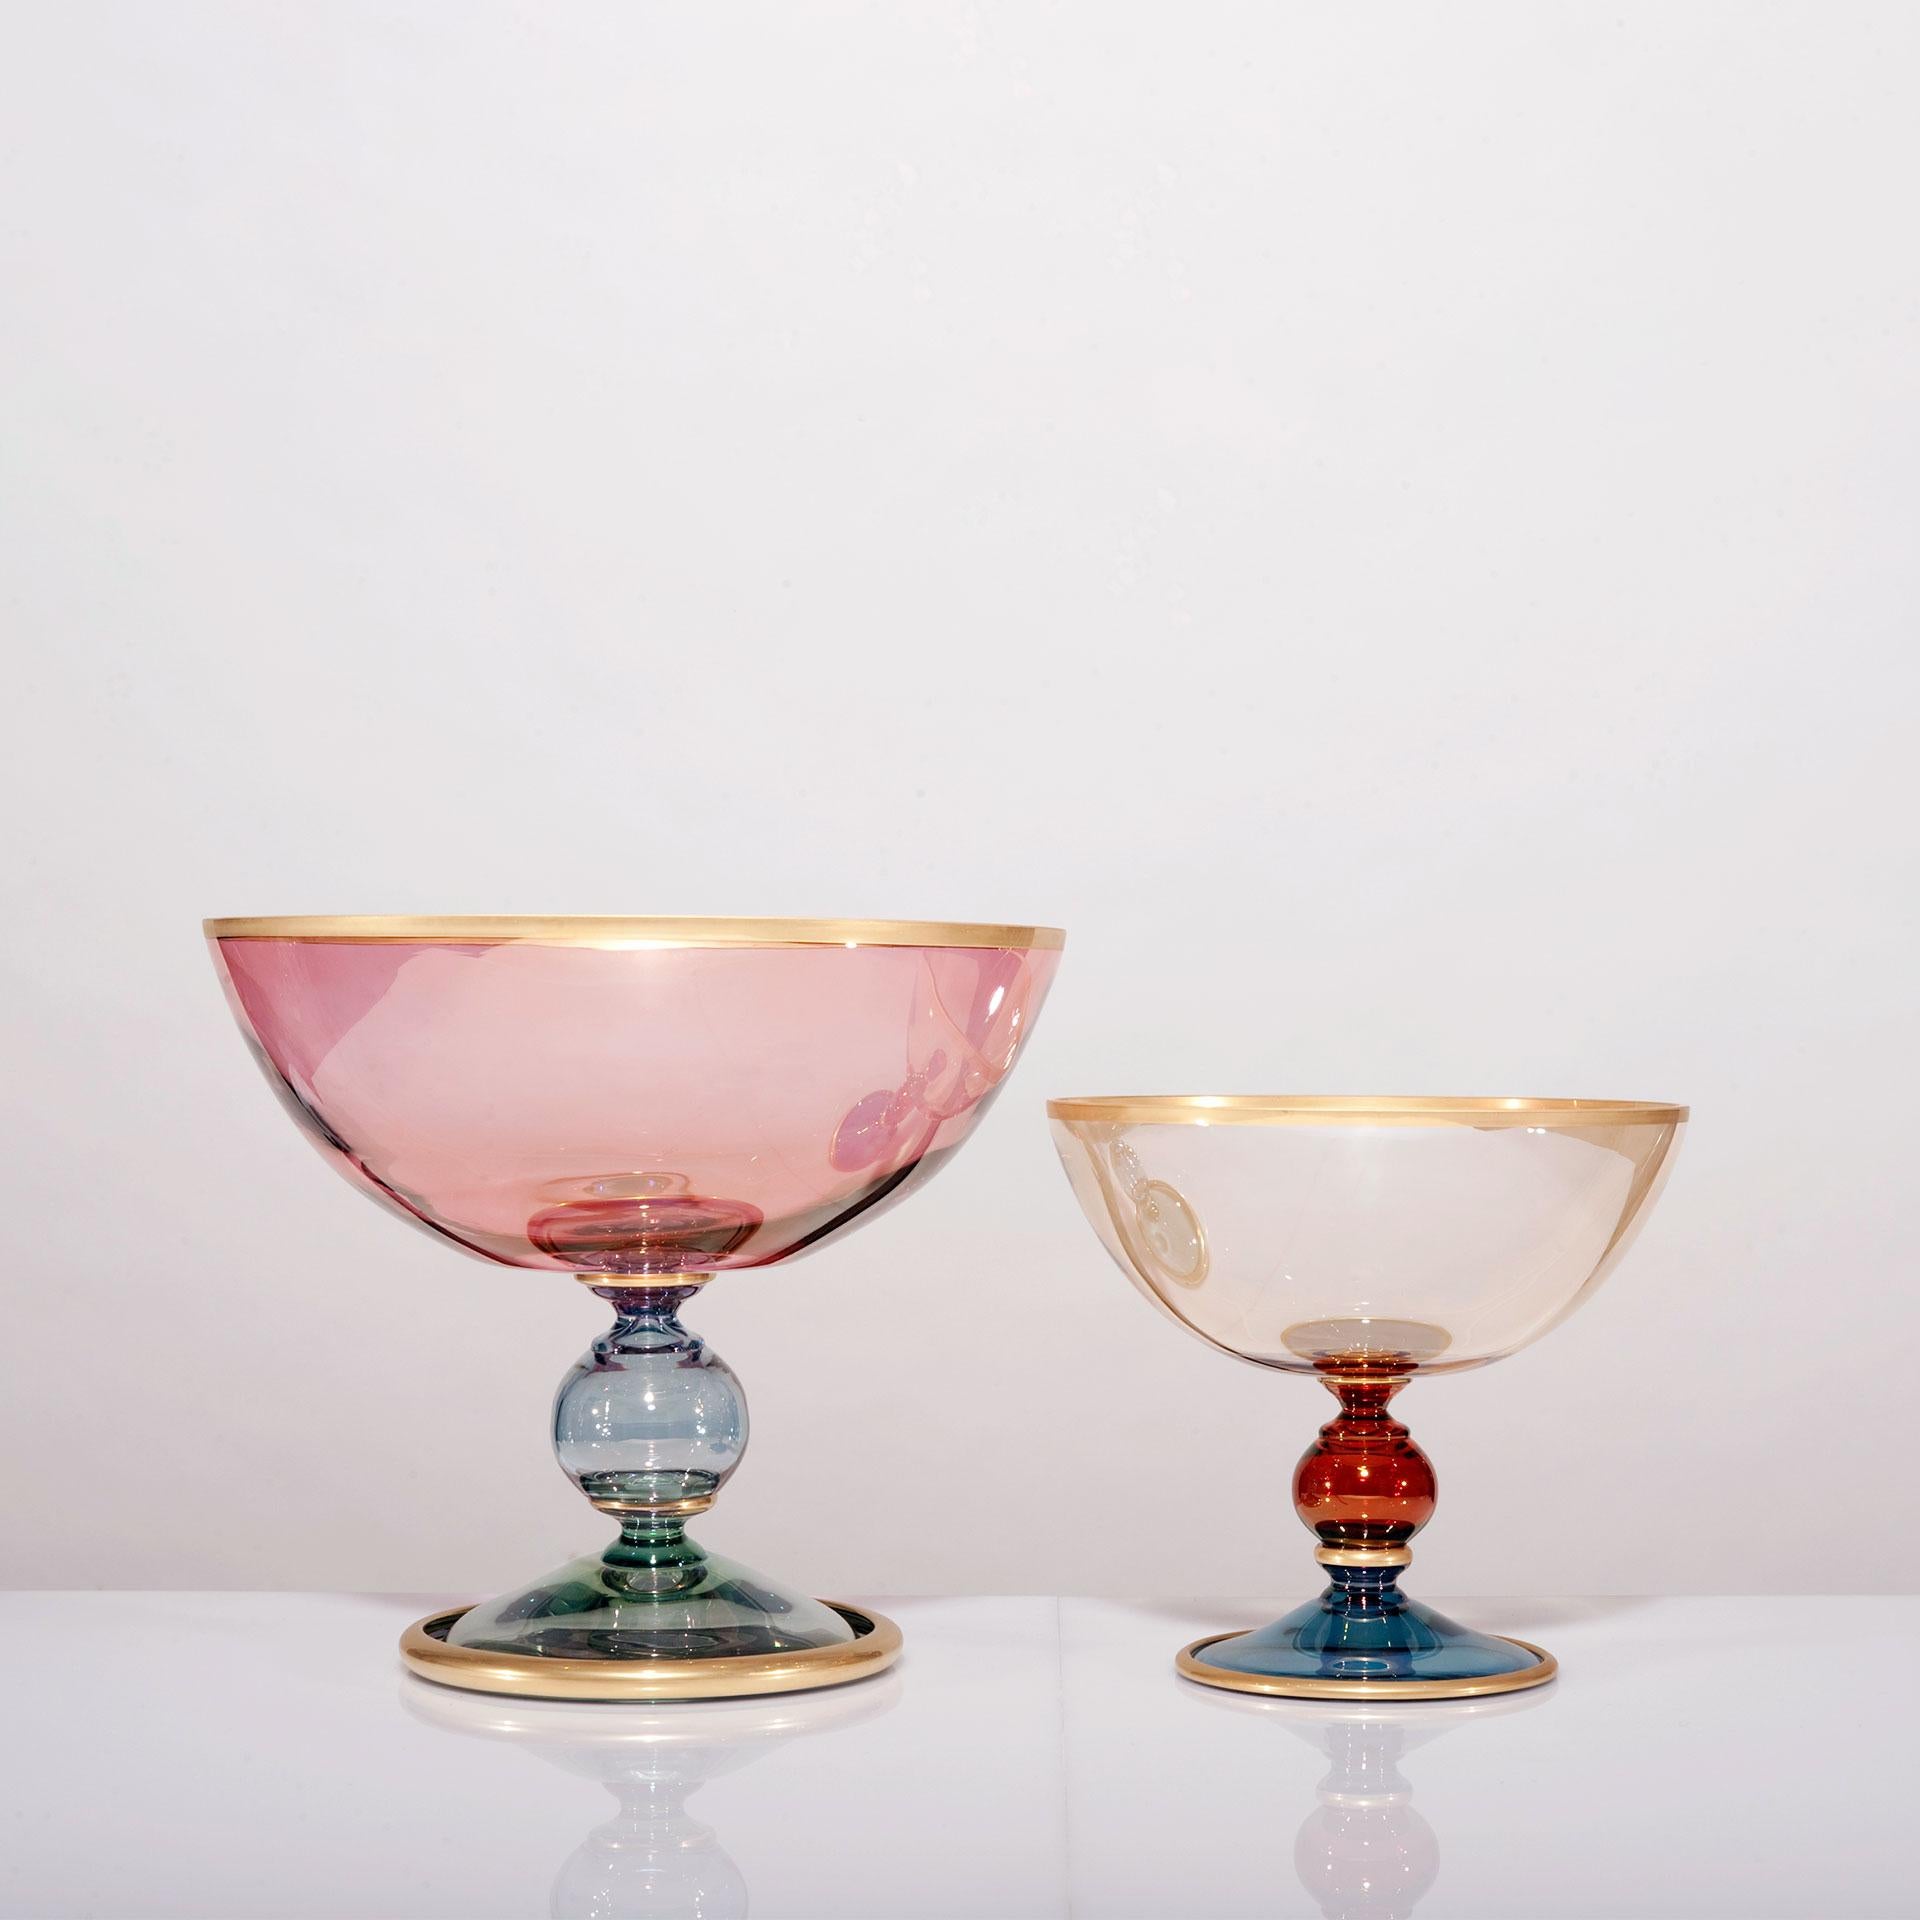 This cup is part of the Dolce Vita collection, made up of finely-crafted glass pieces that are painted by hand in delicate pastel colors and then given a matte satin finish with pure gold accents to make them precious objects of functional decor. 